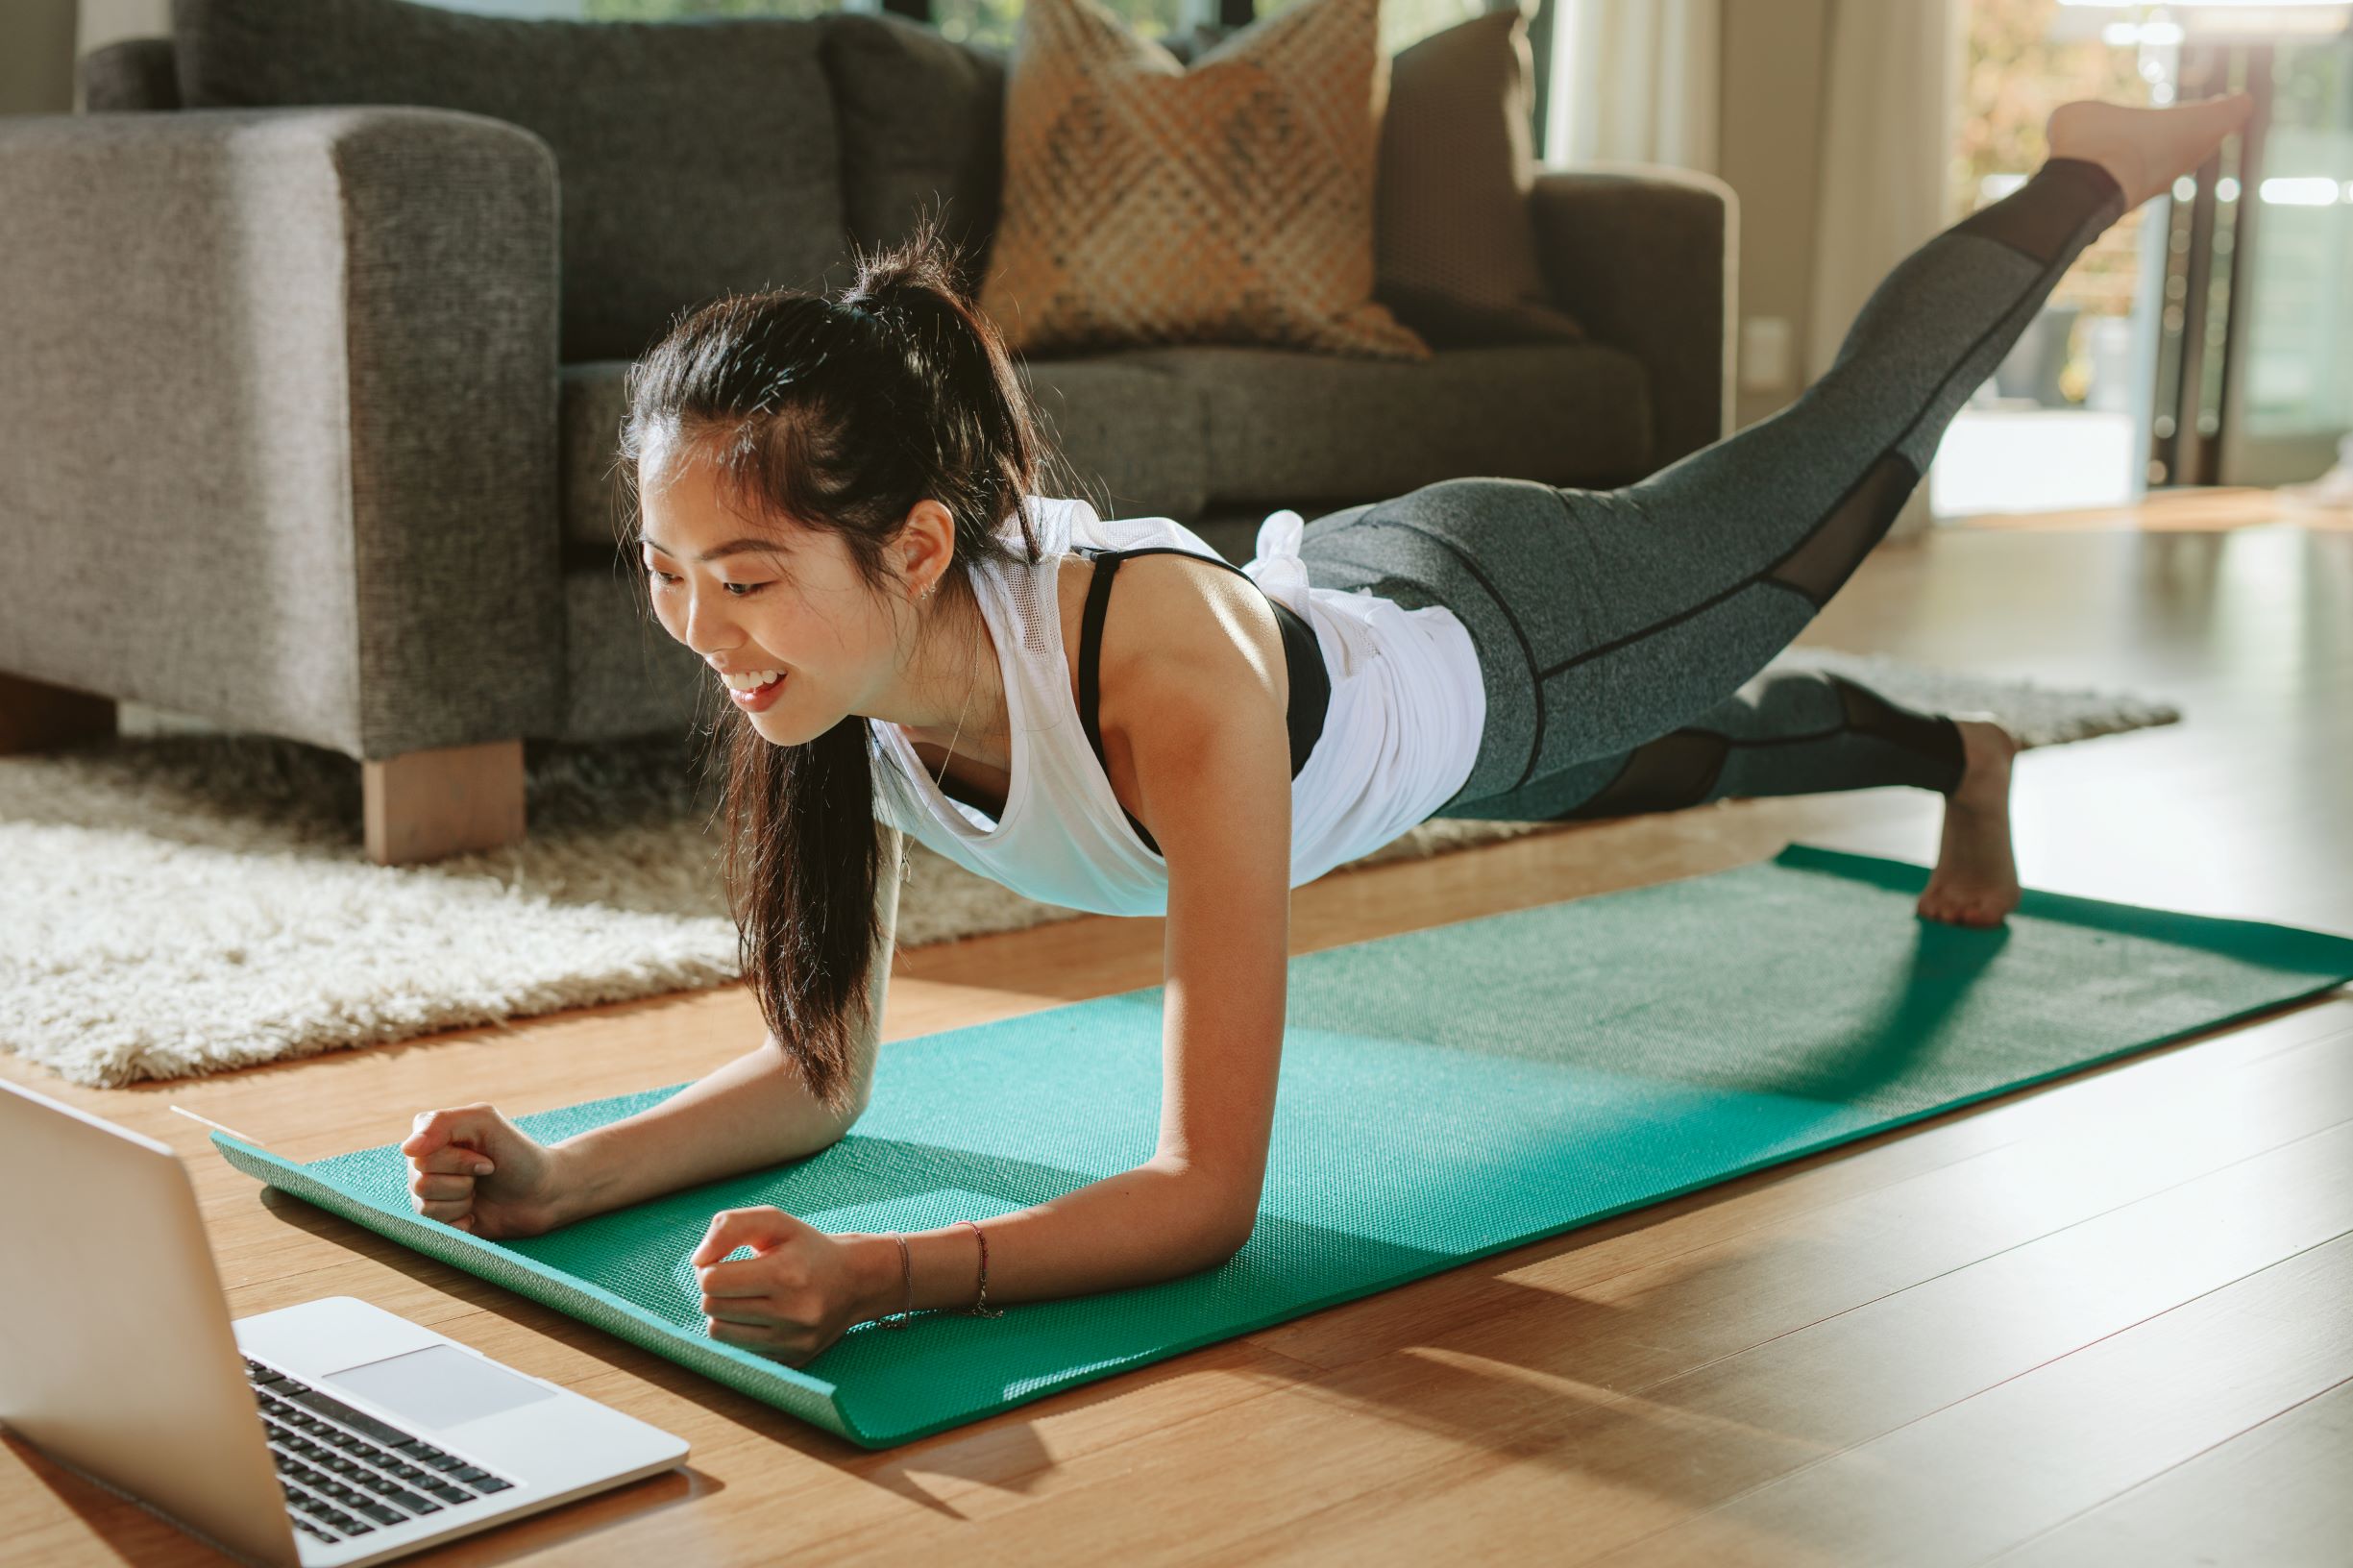 Virtual workouts can help you stay connected while reducing stress during this COVID-19 stay-at-home order.